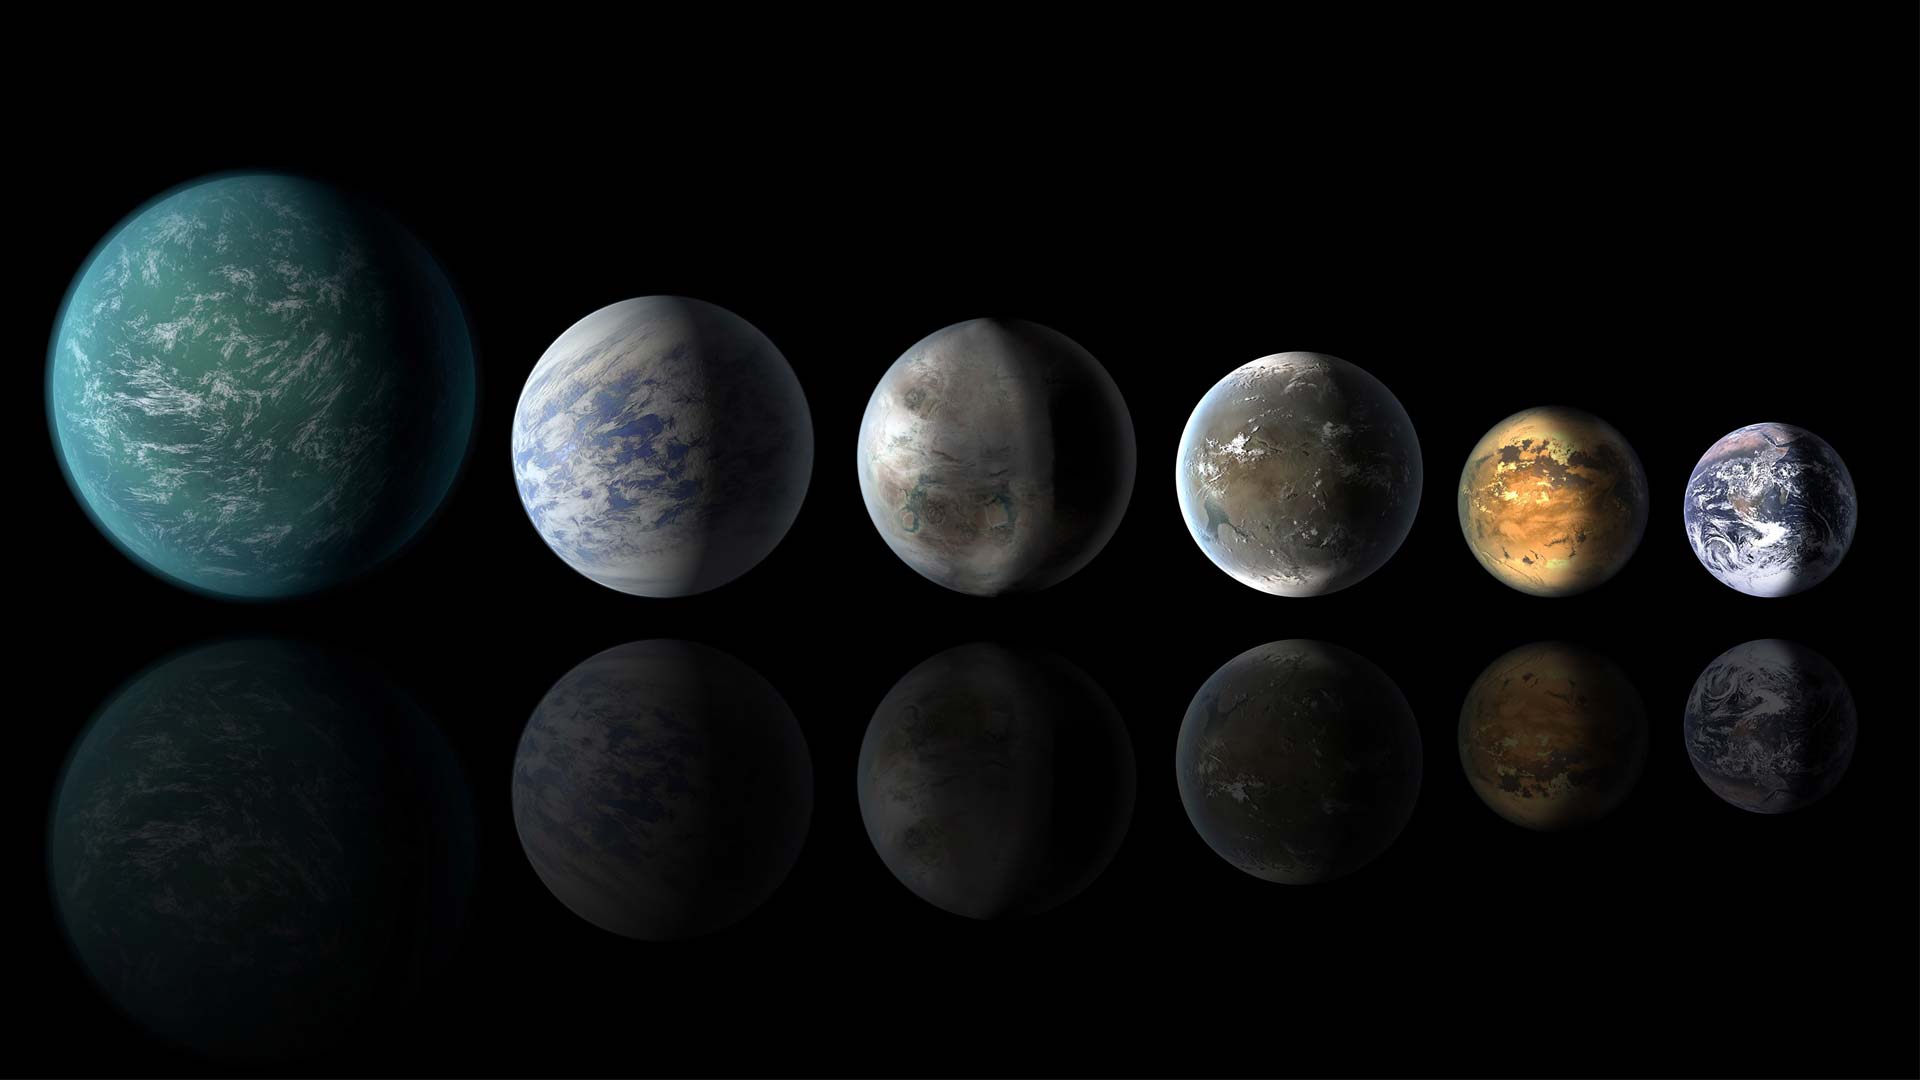 Uncovering details about exoplanets.